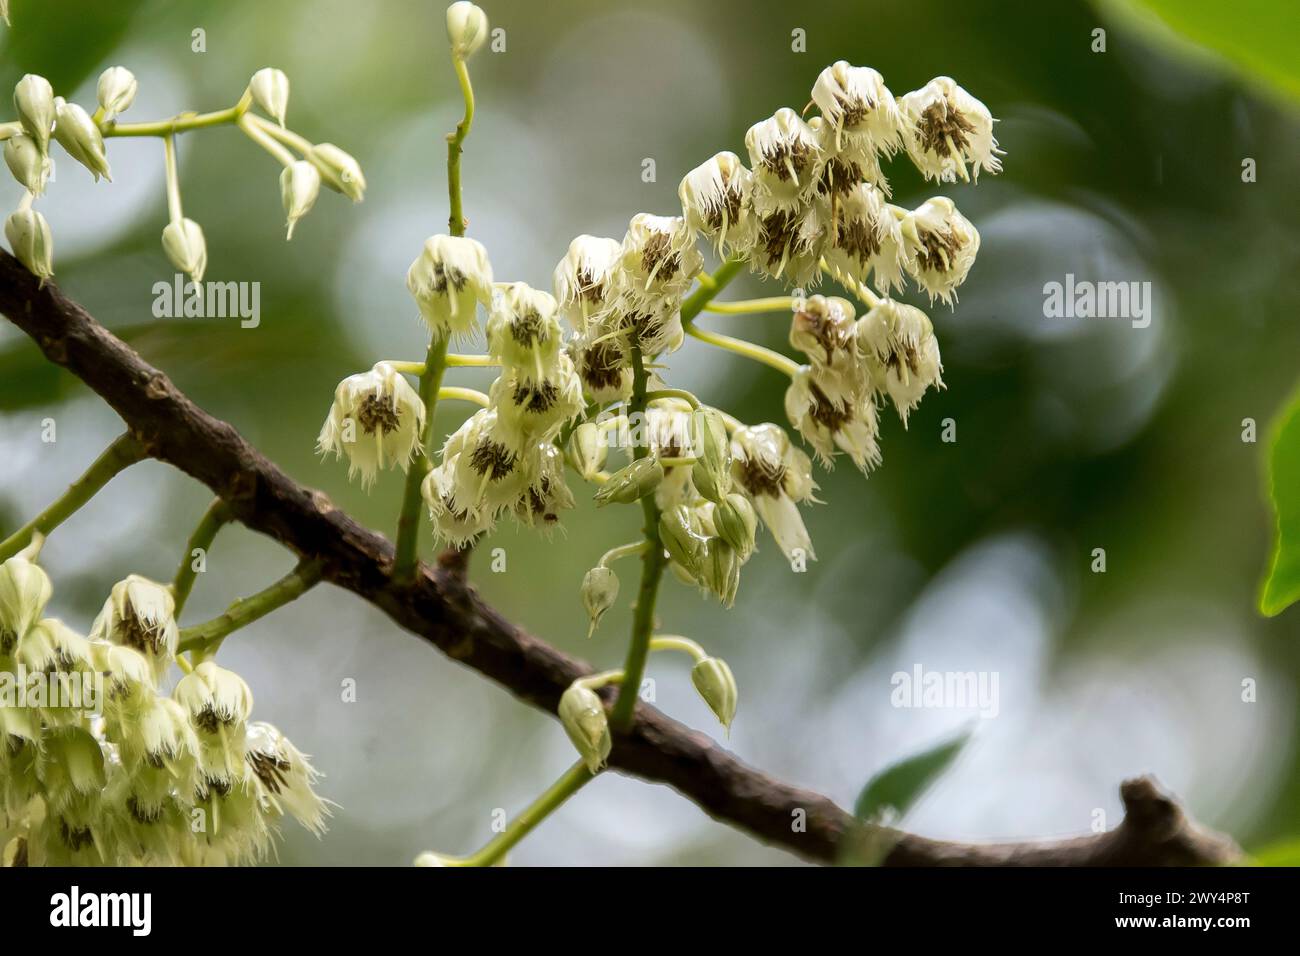 Creamy white racemes of blossom on branches of Australian  Blue Quandong tree, Elaeocarpus angustifolius. Queensland rainforest. Wet after rain. Stock Photo